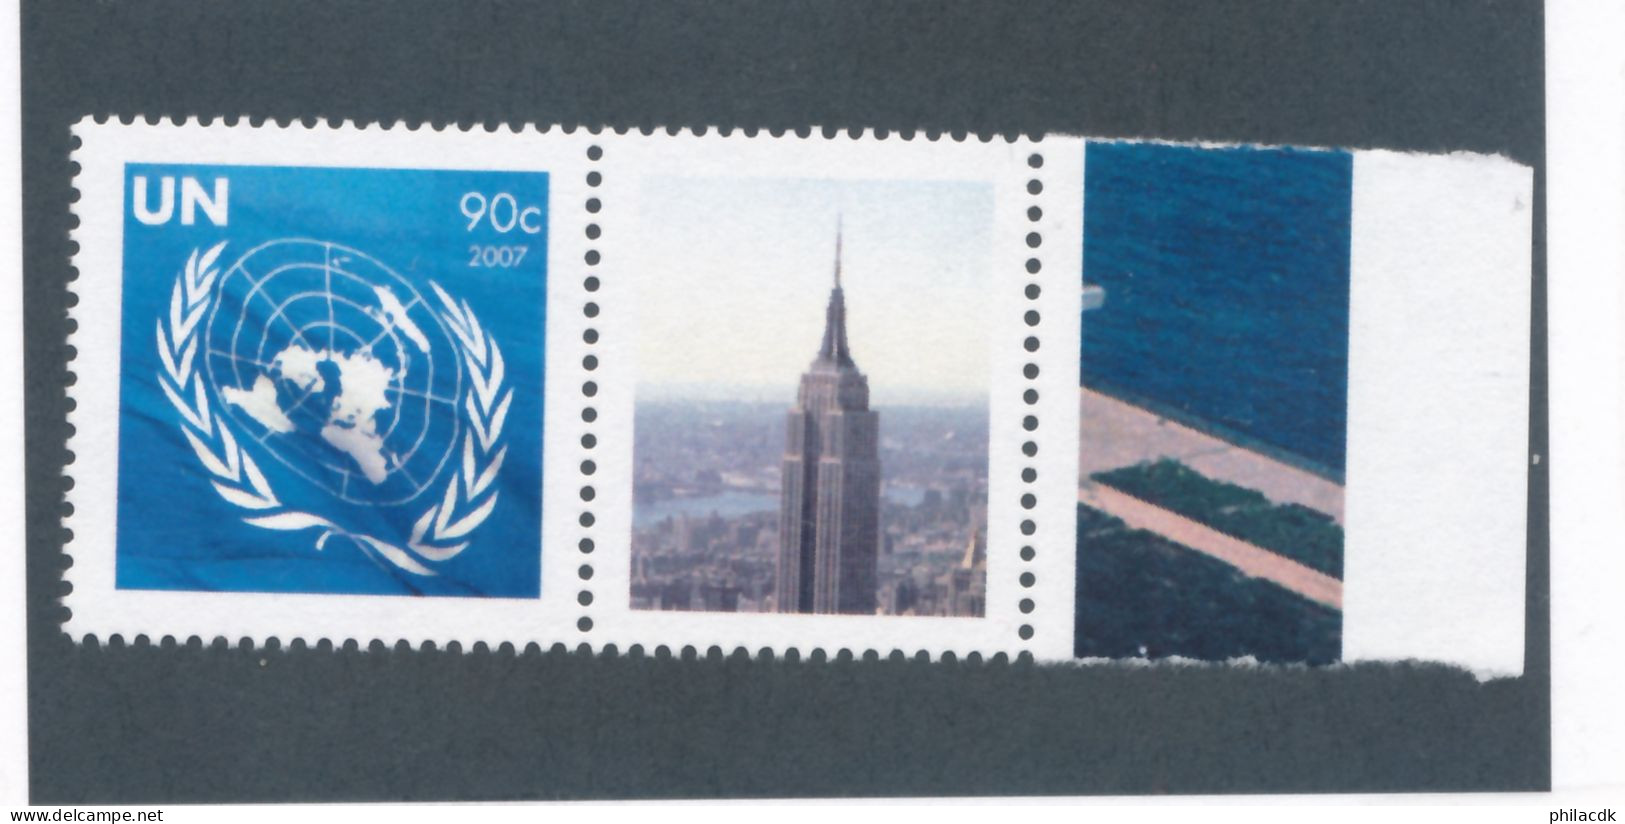 NATIONS UNIES NEW YORK - N° 1053 NEUF (*) SANS GOMME AVEC BORD DE FEUILLE - 2007 - Unused Stamps